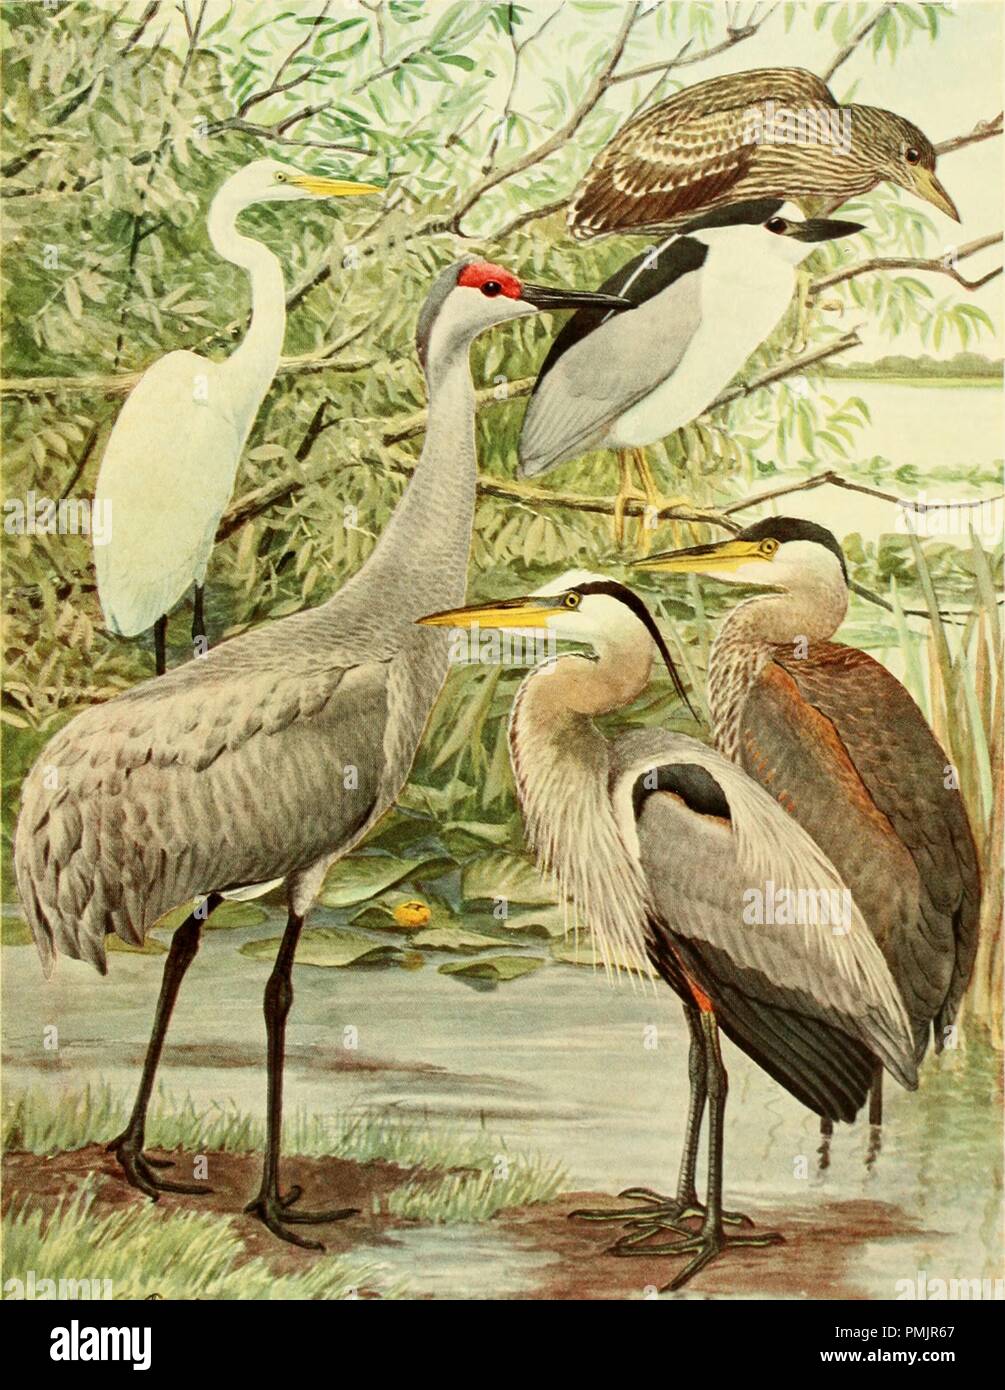 Drawing of different variations of Herons, American Egret (Herodias Egretta), Sandhill Crane (Grus Mexicana), Black-crowned Night-Heron (Nycticorax Nycticorax Naevius) and Great Blue Heron (Ardea Herodias Linnaeus), from the book 'Birds of New York', 1914. Courtesy Internet Archive. () Stock Photo